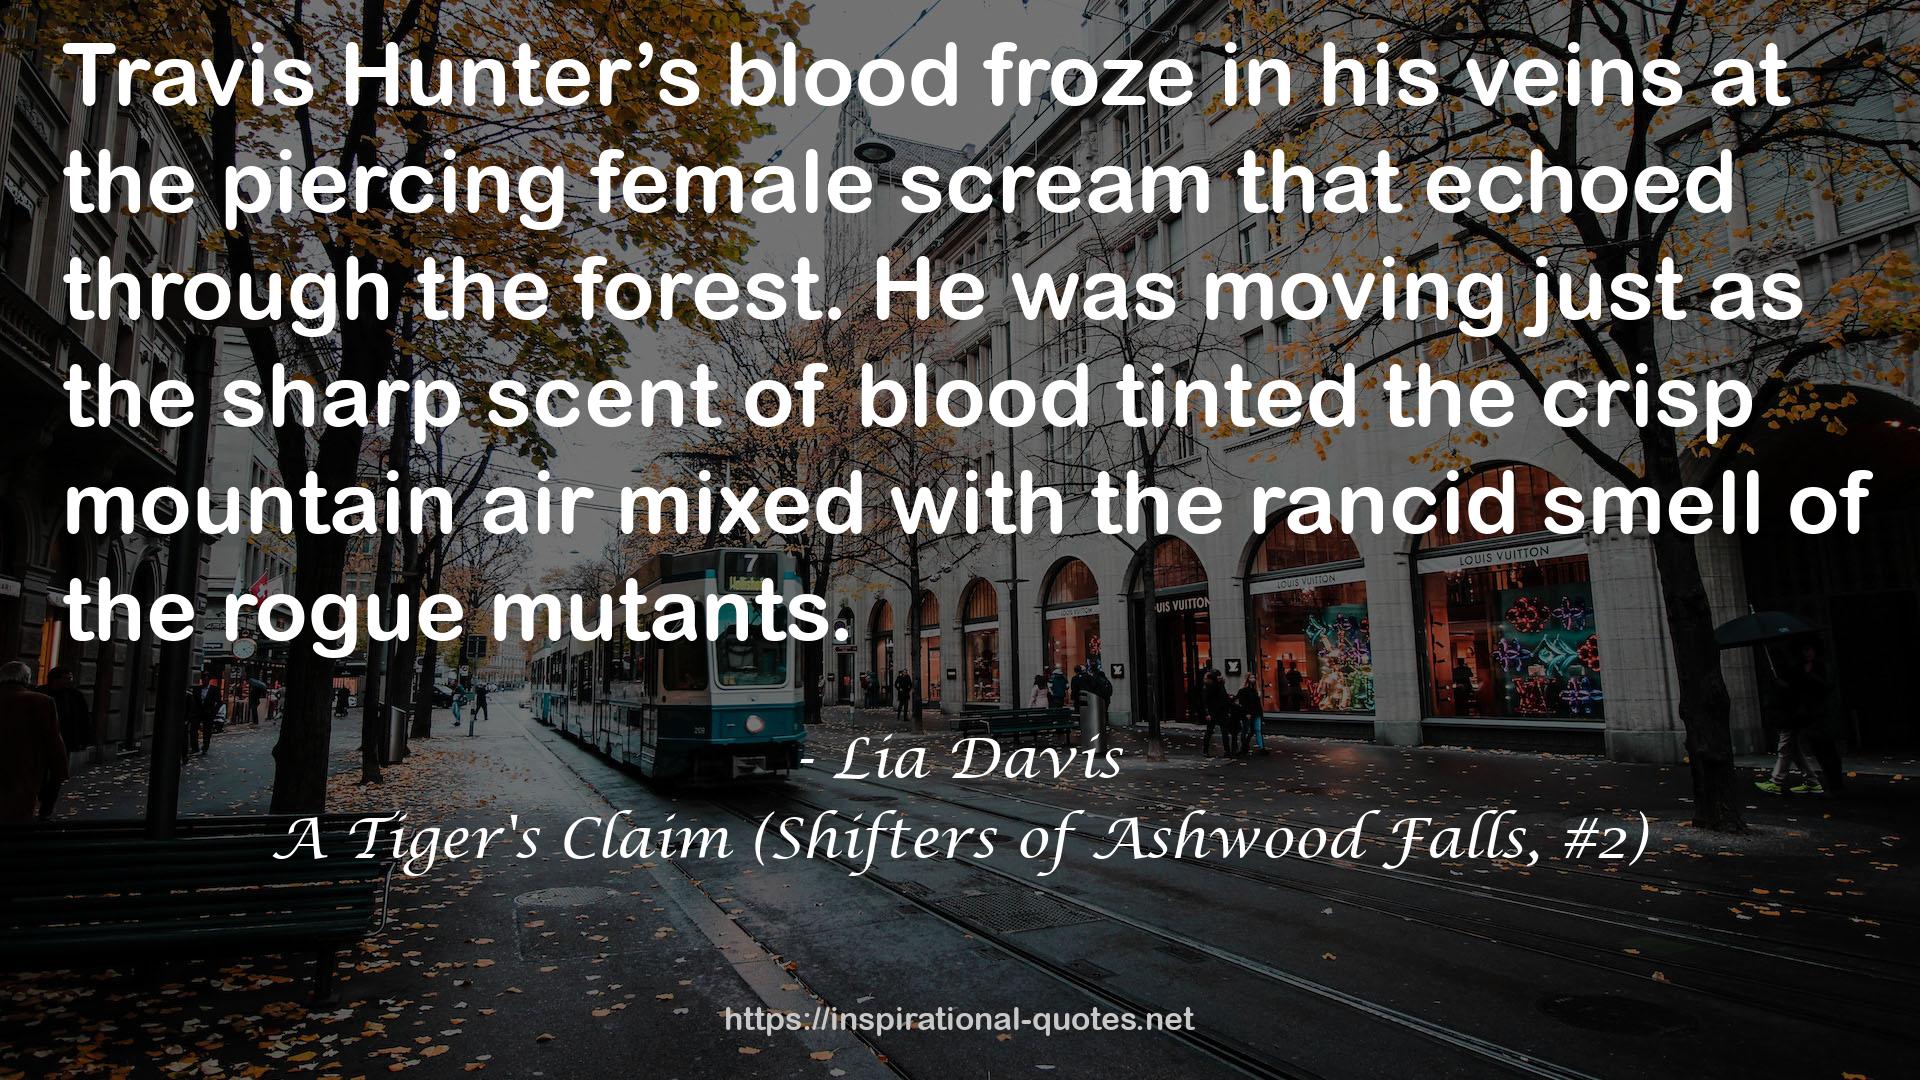 A Tiger's Claim (Shifters of Ashwood Falls, #2) QUOTES